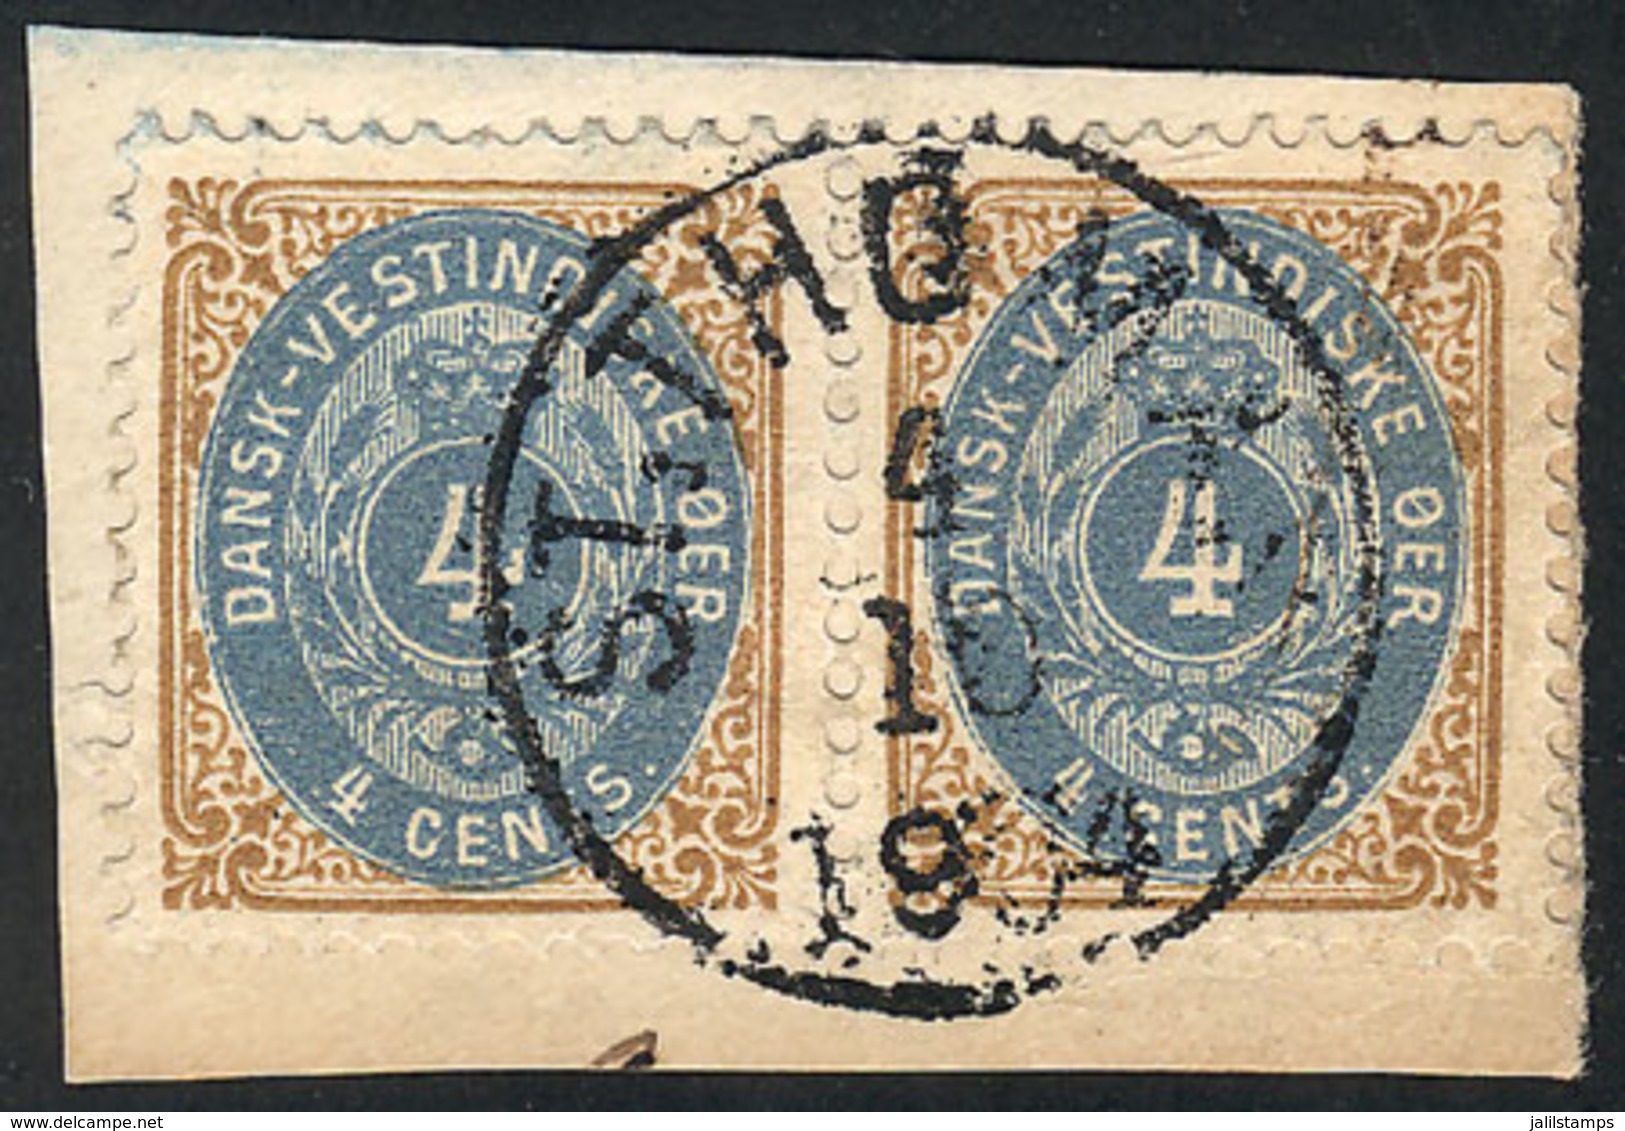 DANISH ANTILLES: Sc.18, 1896 4c., Pair Used On Fragment With Cancel Of St.Thomas For 4/OC/1904, VF Quality! - Denmark (West Indies)